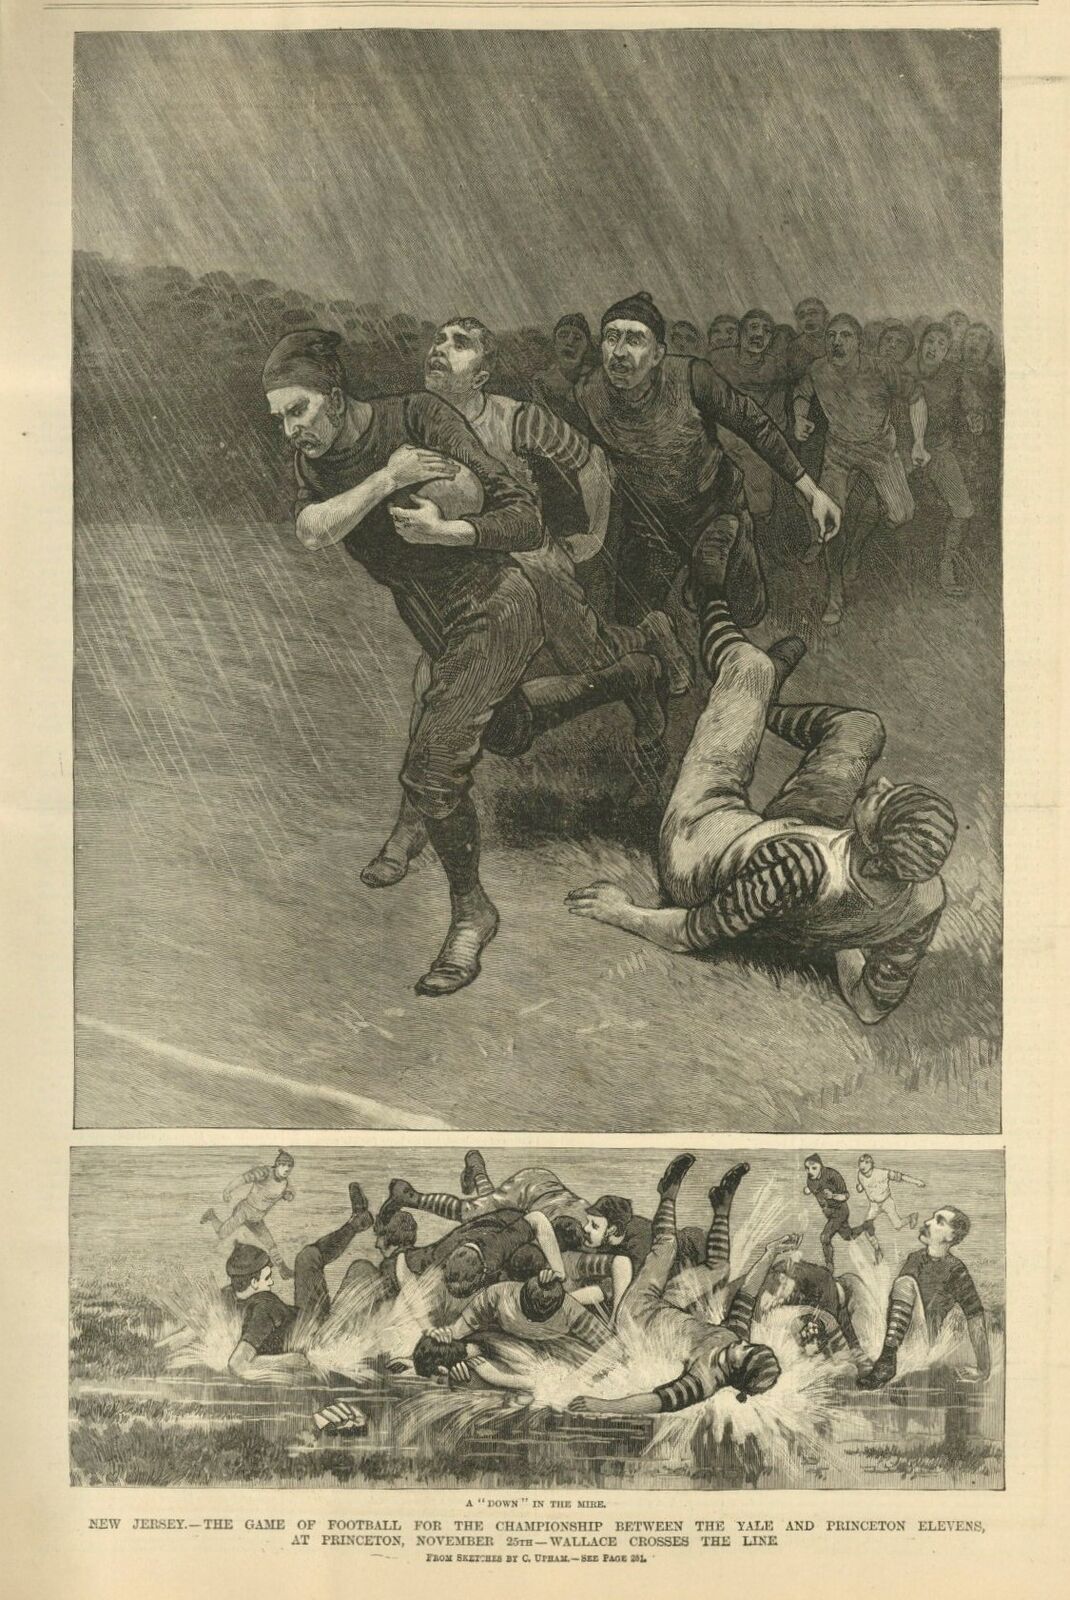 COLLEGE FOOTBALL FOR THE CHAMPIONSHIP BETWEEN THE YALE AND PRINCETON ELEVENS